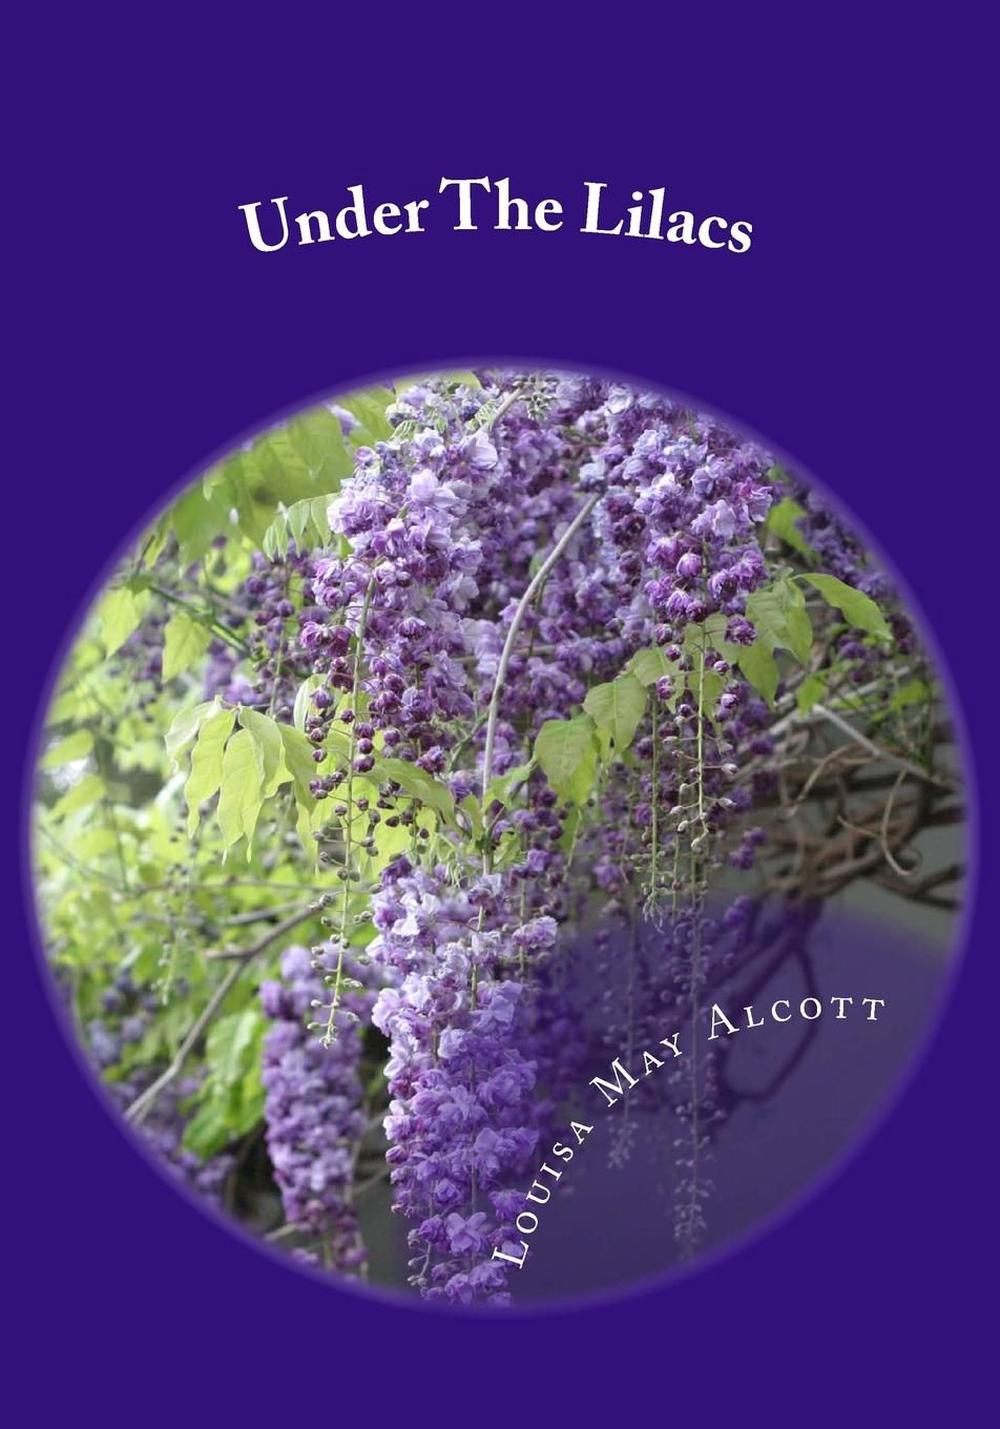 Under the Lilacs by Louisa May Alcott (English) Paperback Book Free Shipping! 9781507709634 | eBay